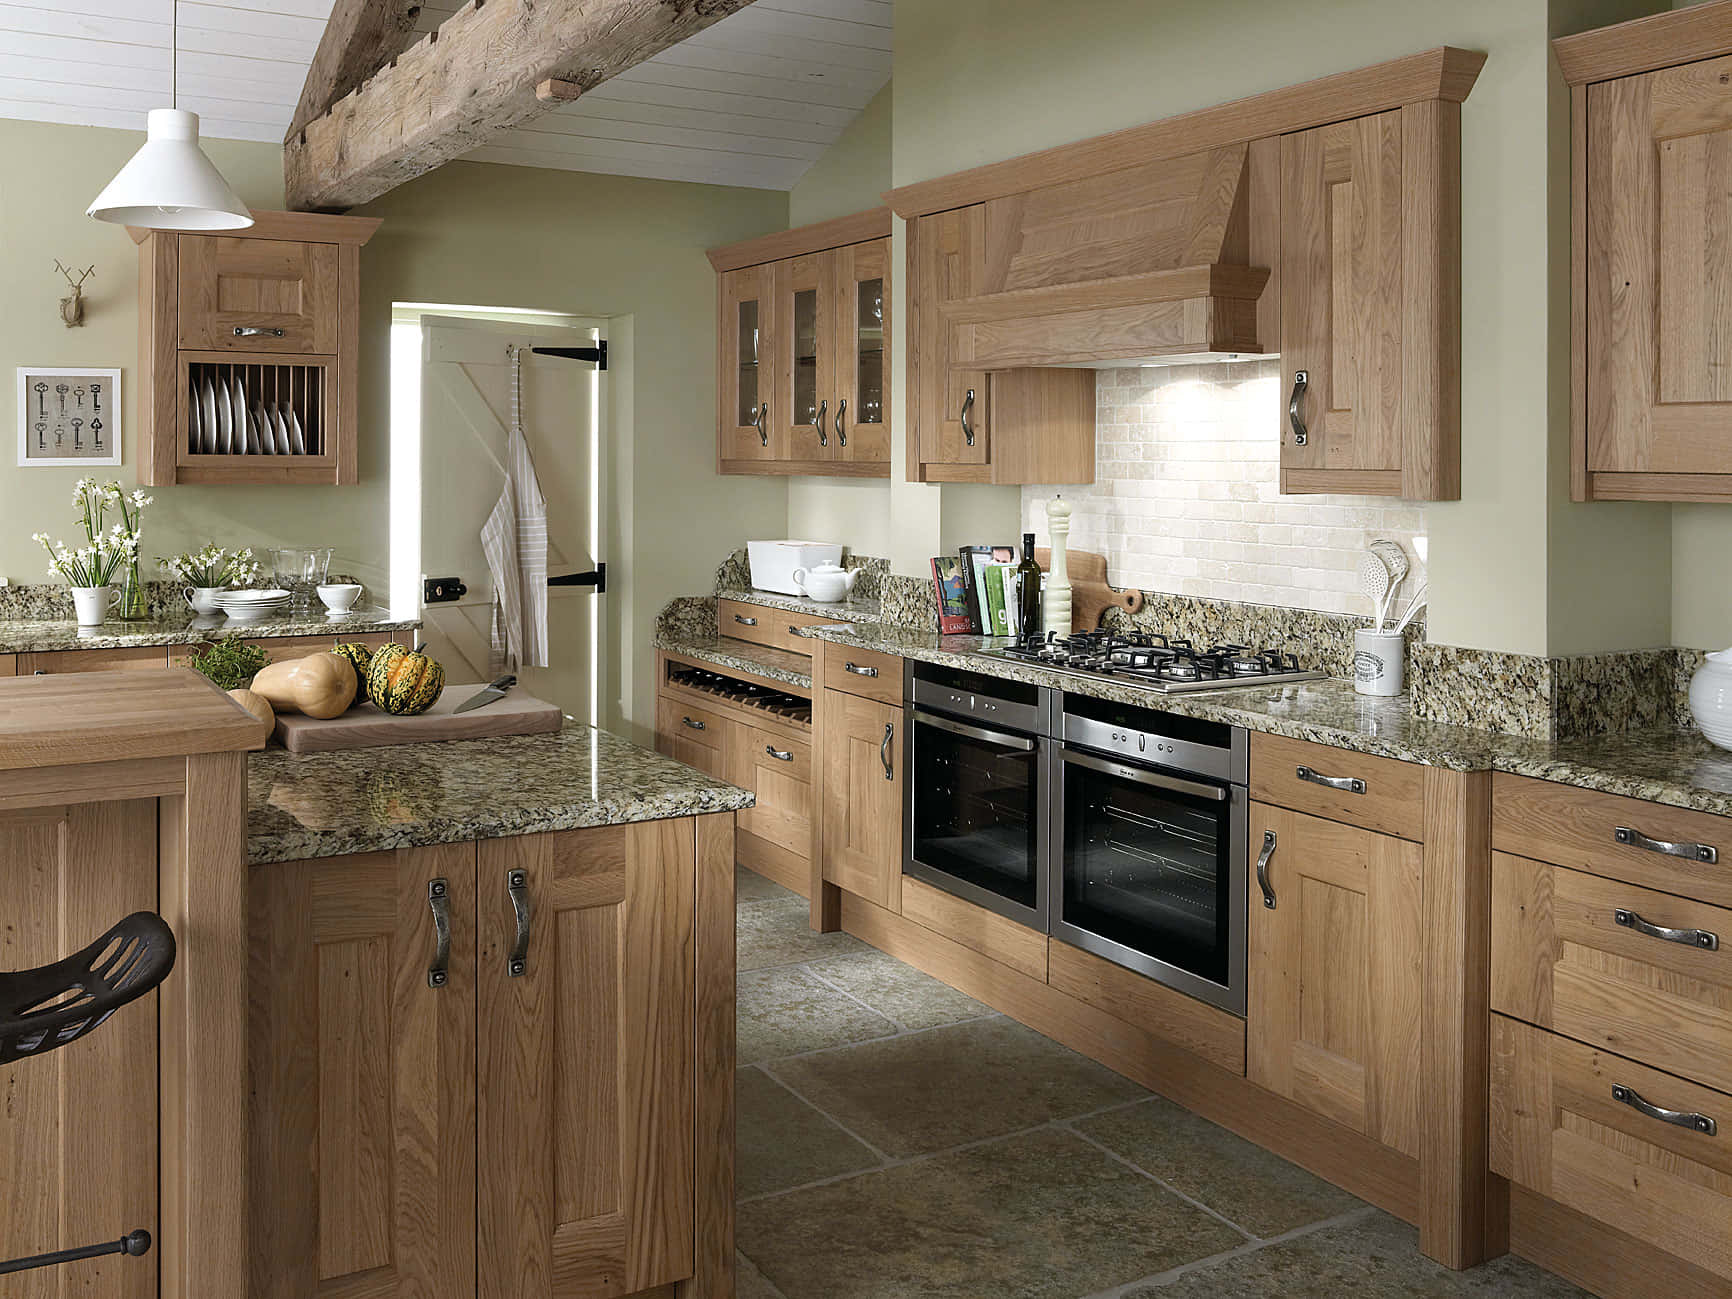 A Kitchen With Wooden Cabinets And Granite Counter Tops